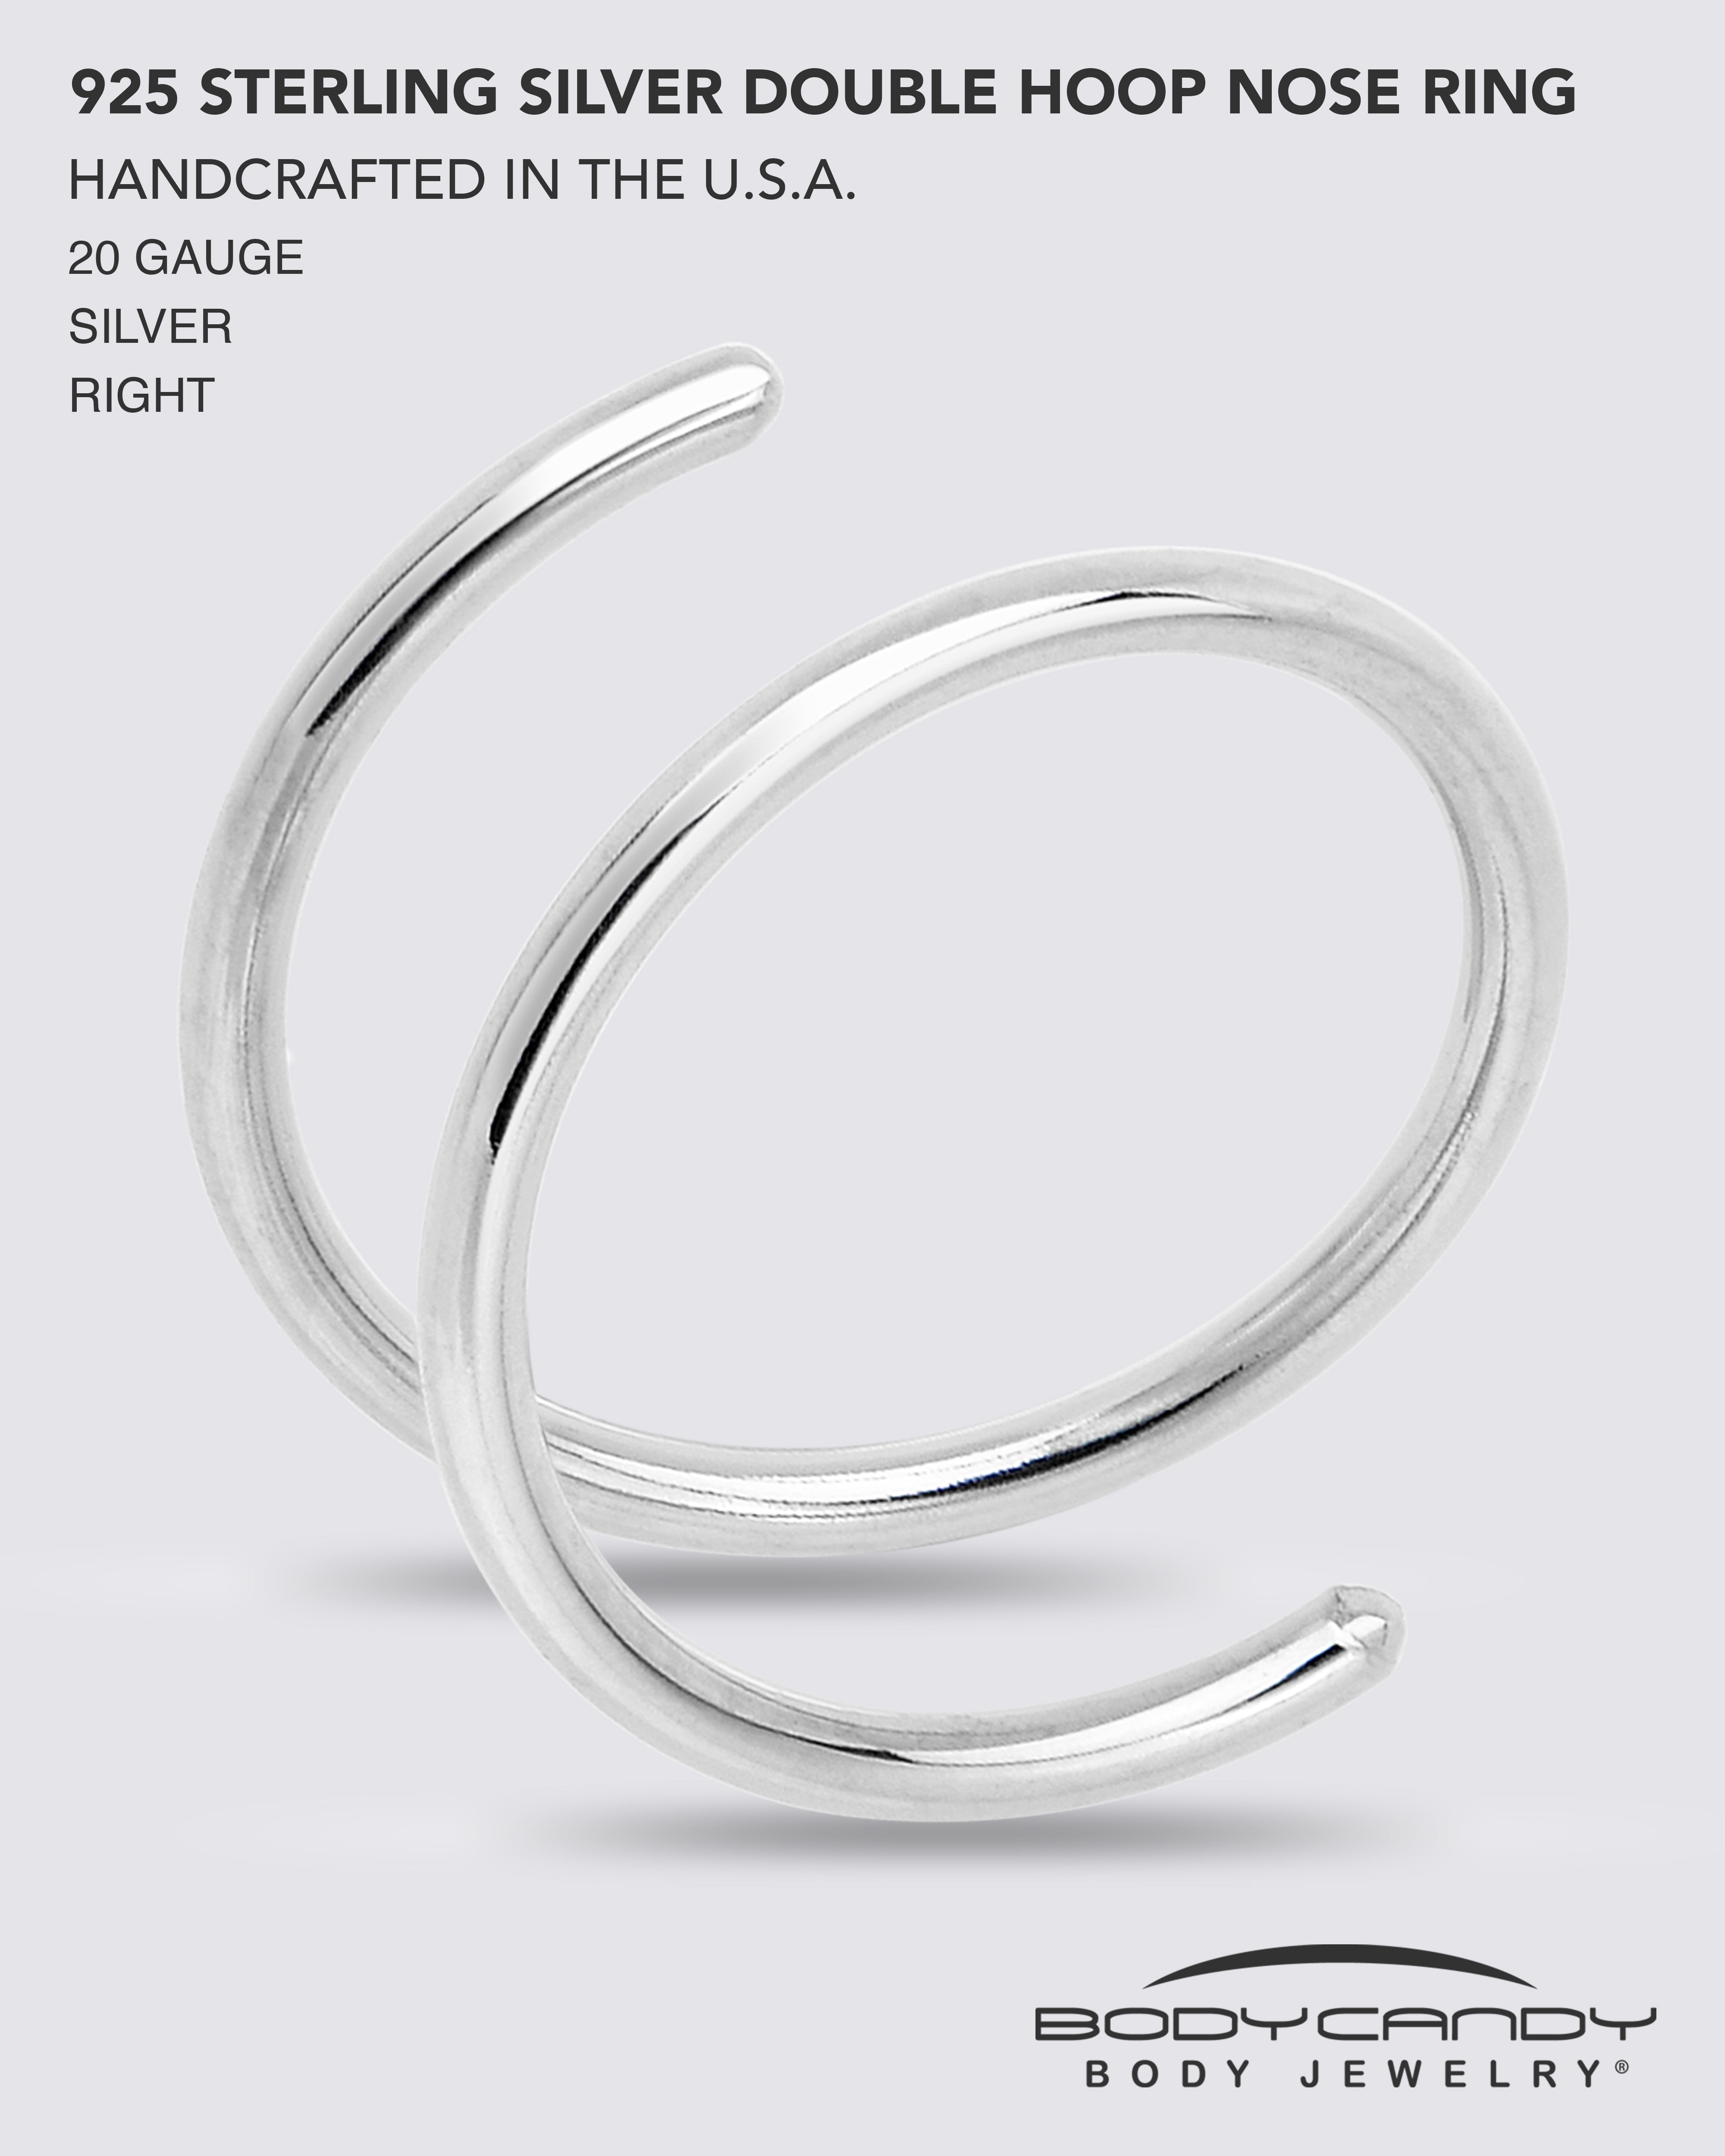 Double Nose Ring for Single Piercing Double Hoop Nose Ring for Single  Piercing D | eBay